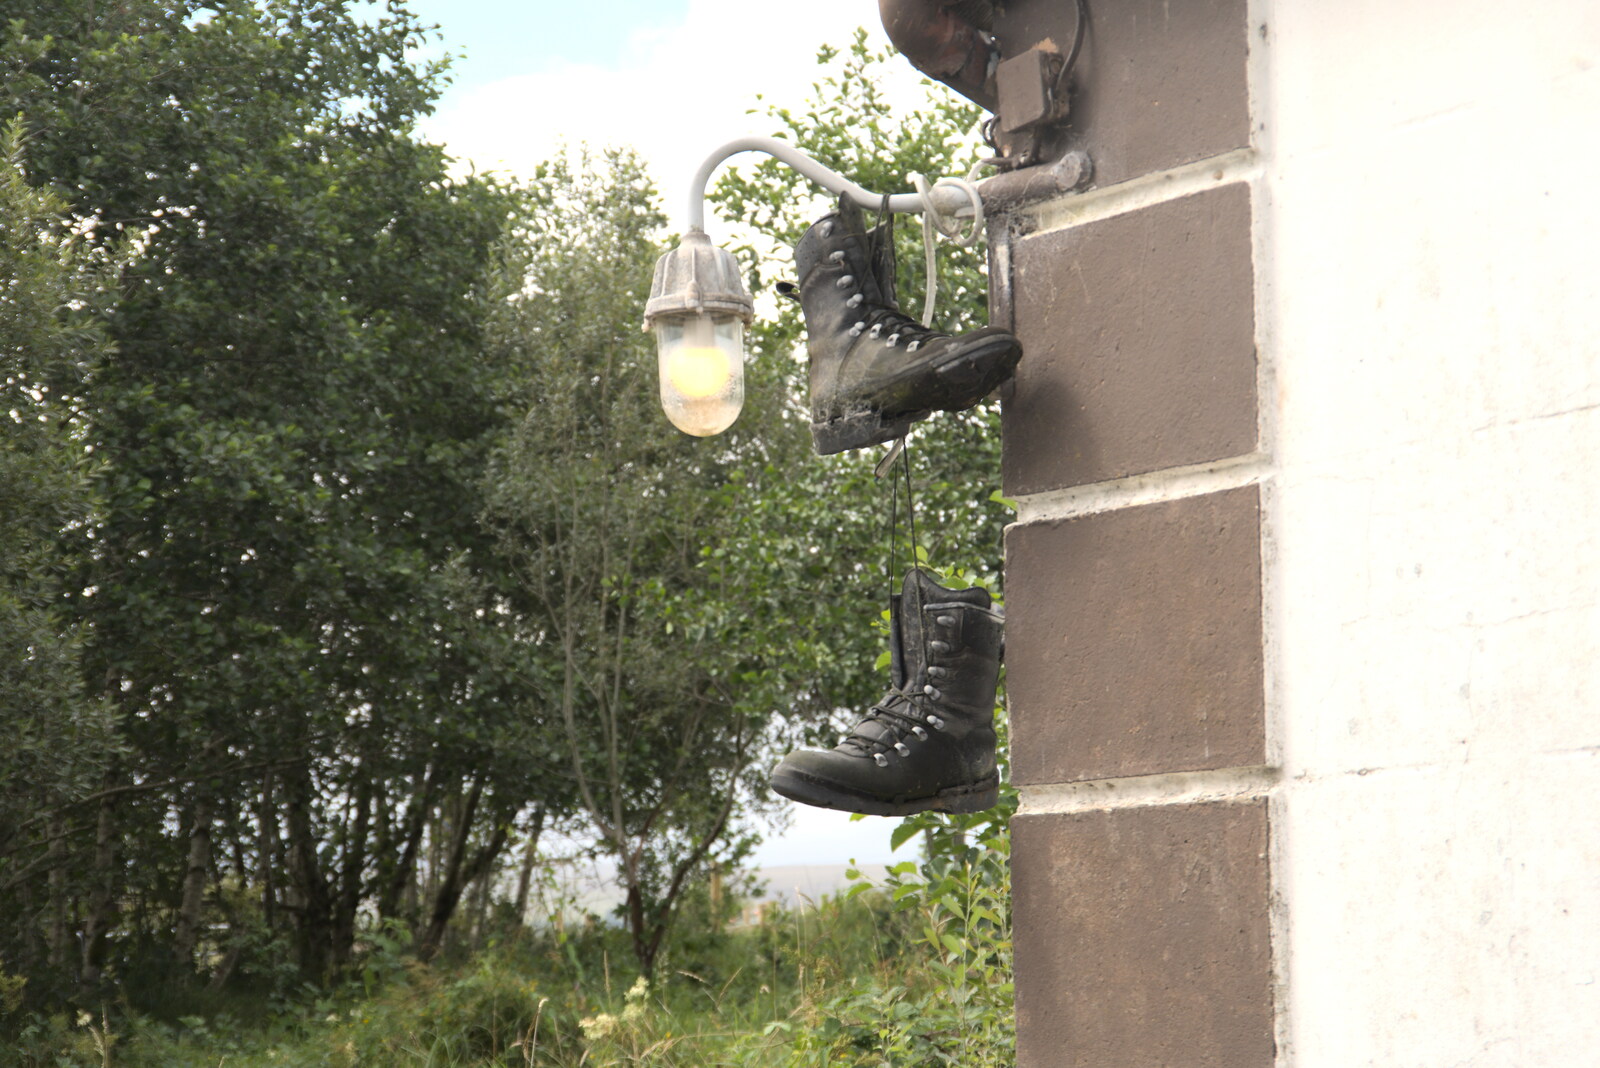 Pints of Guinness and Streedagh Beach, Grange and Sligo, Ireland - 9th August 2021: A pair of boots hang up on an outside light